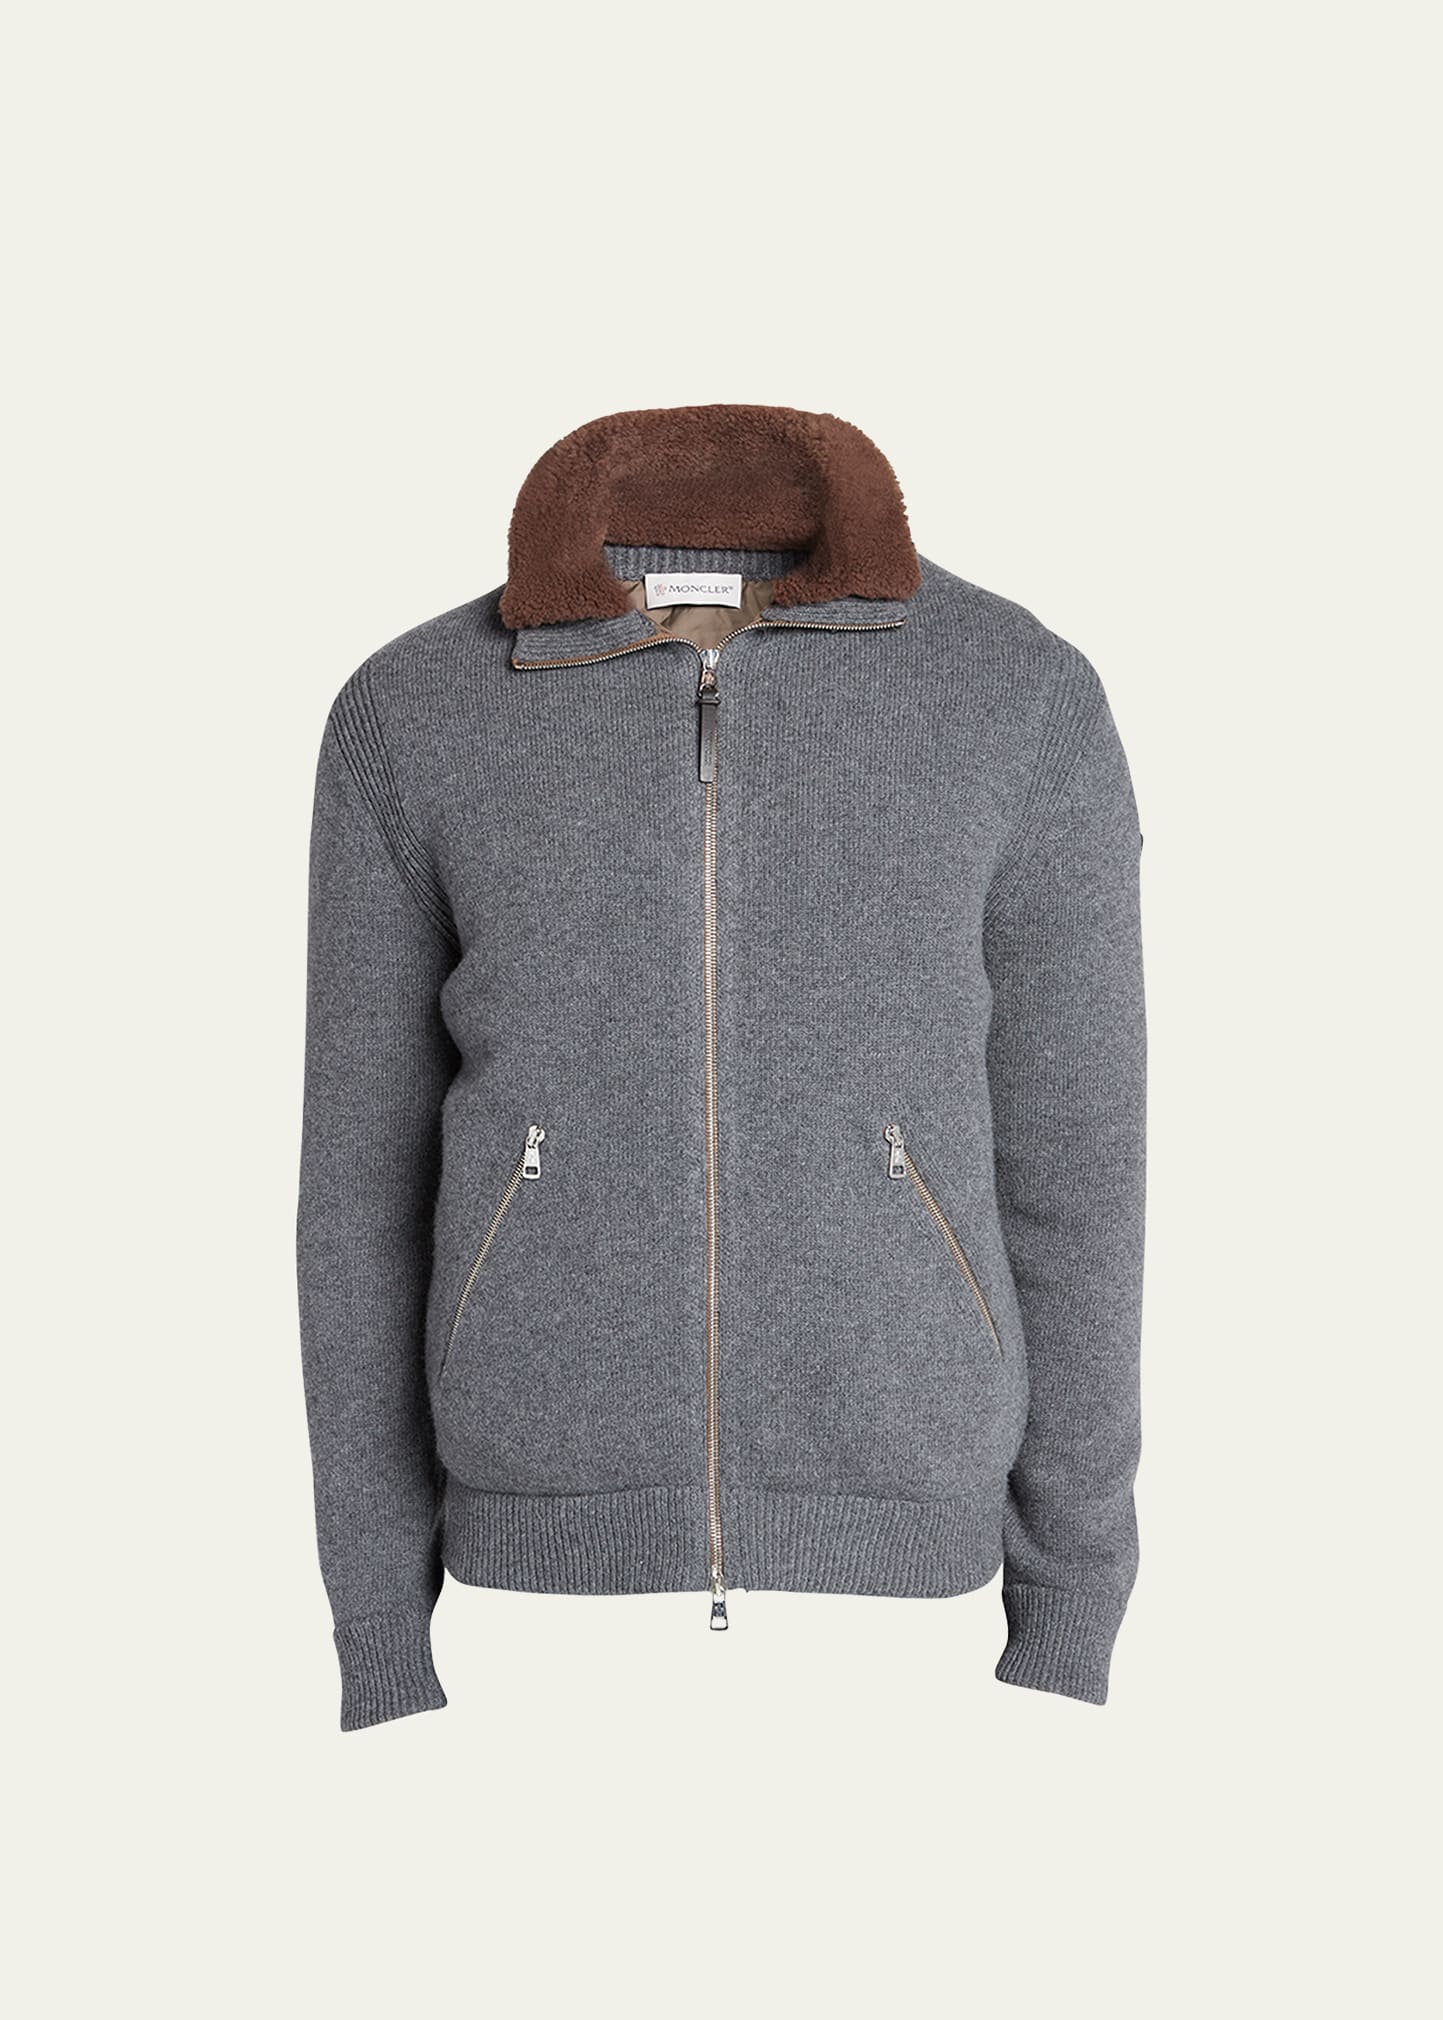 MONCLER MEN'S CASHMERE ZIP-FRONT CARDIGAN WITH SHEARLING COLLAR